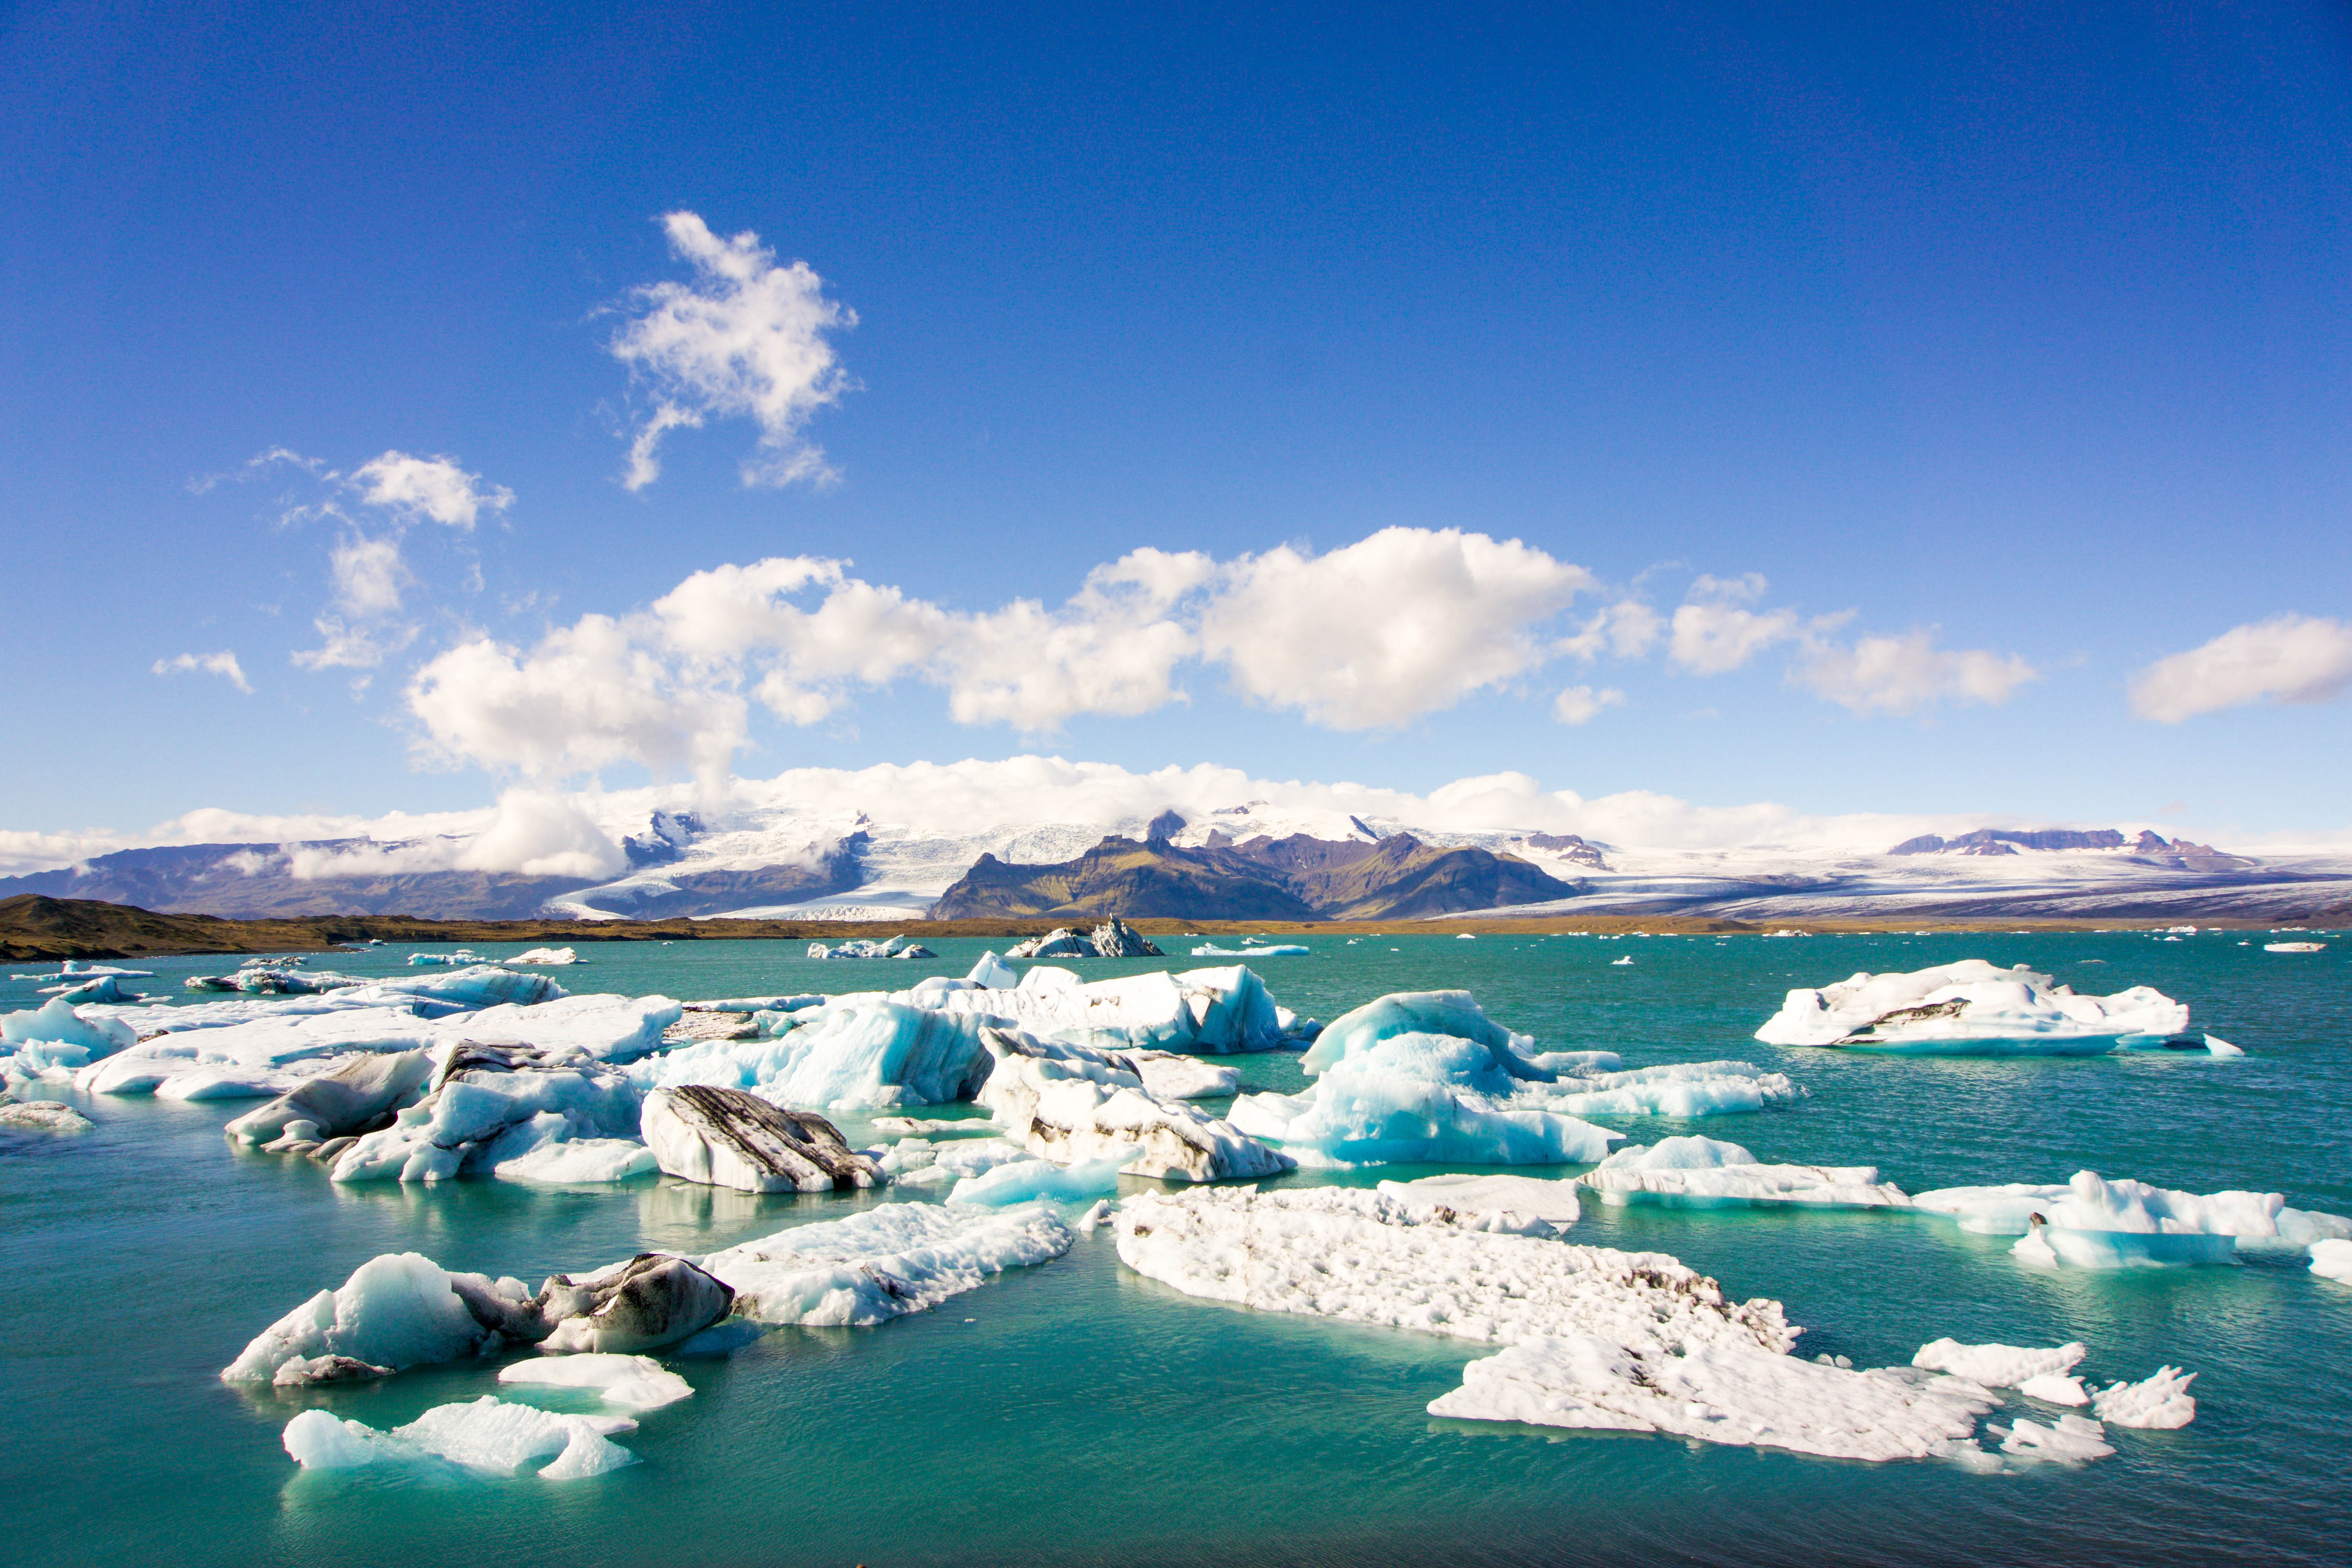 South Iceland must visit places - Jokulsarlon Glacier lagoon and crystal beach // Iceland trip planning made easy with TripCreator.com | Life With a Viwe